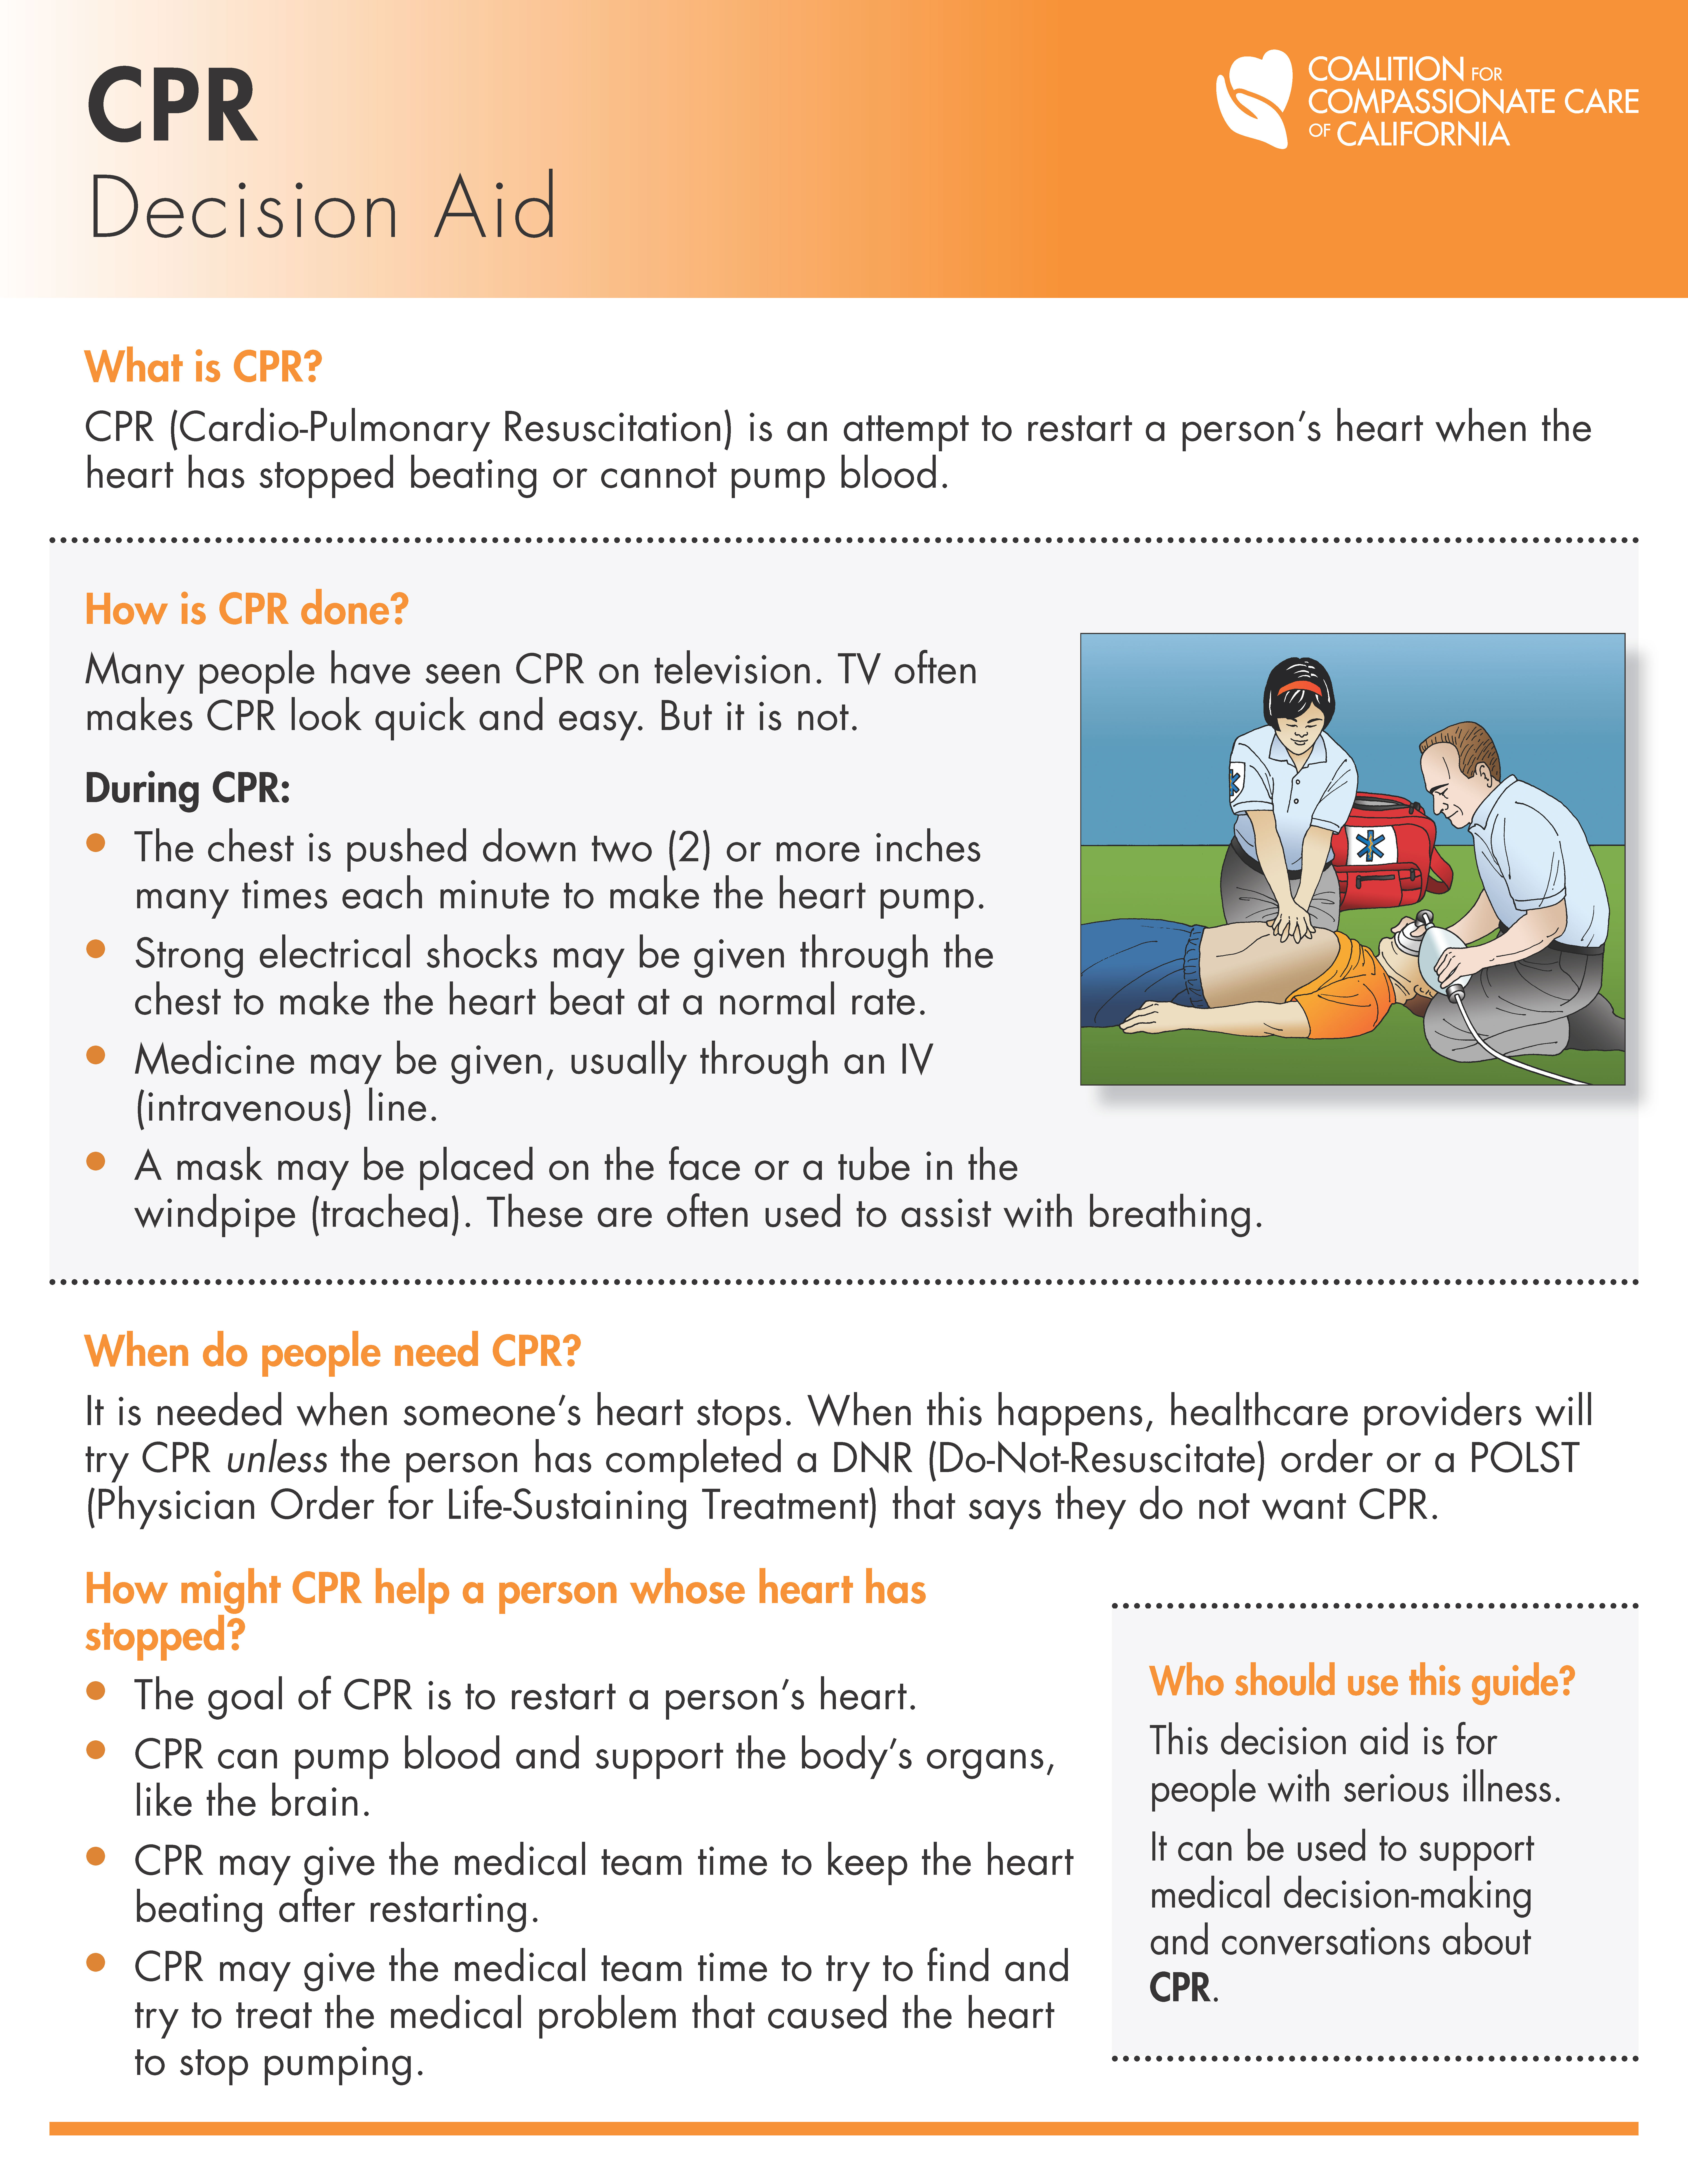 Decision Aid on CPR - English